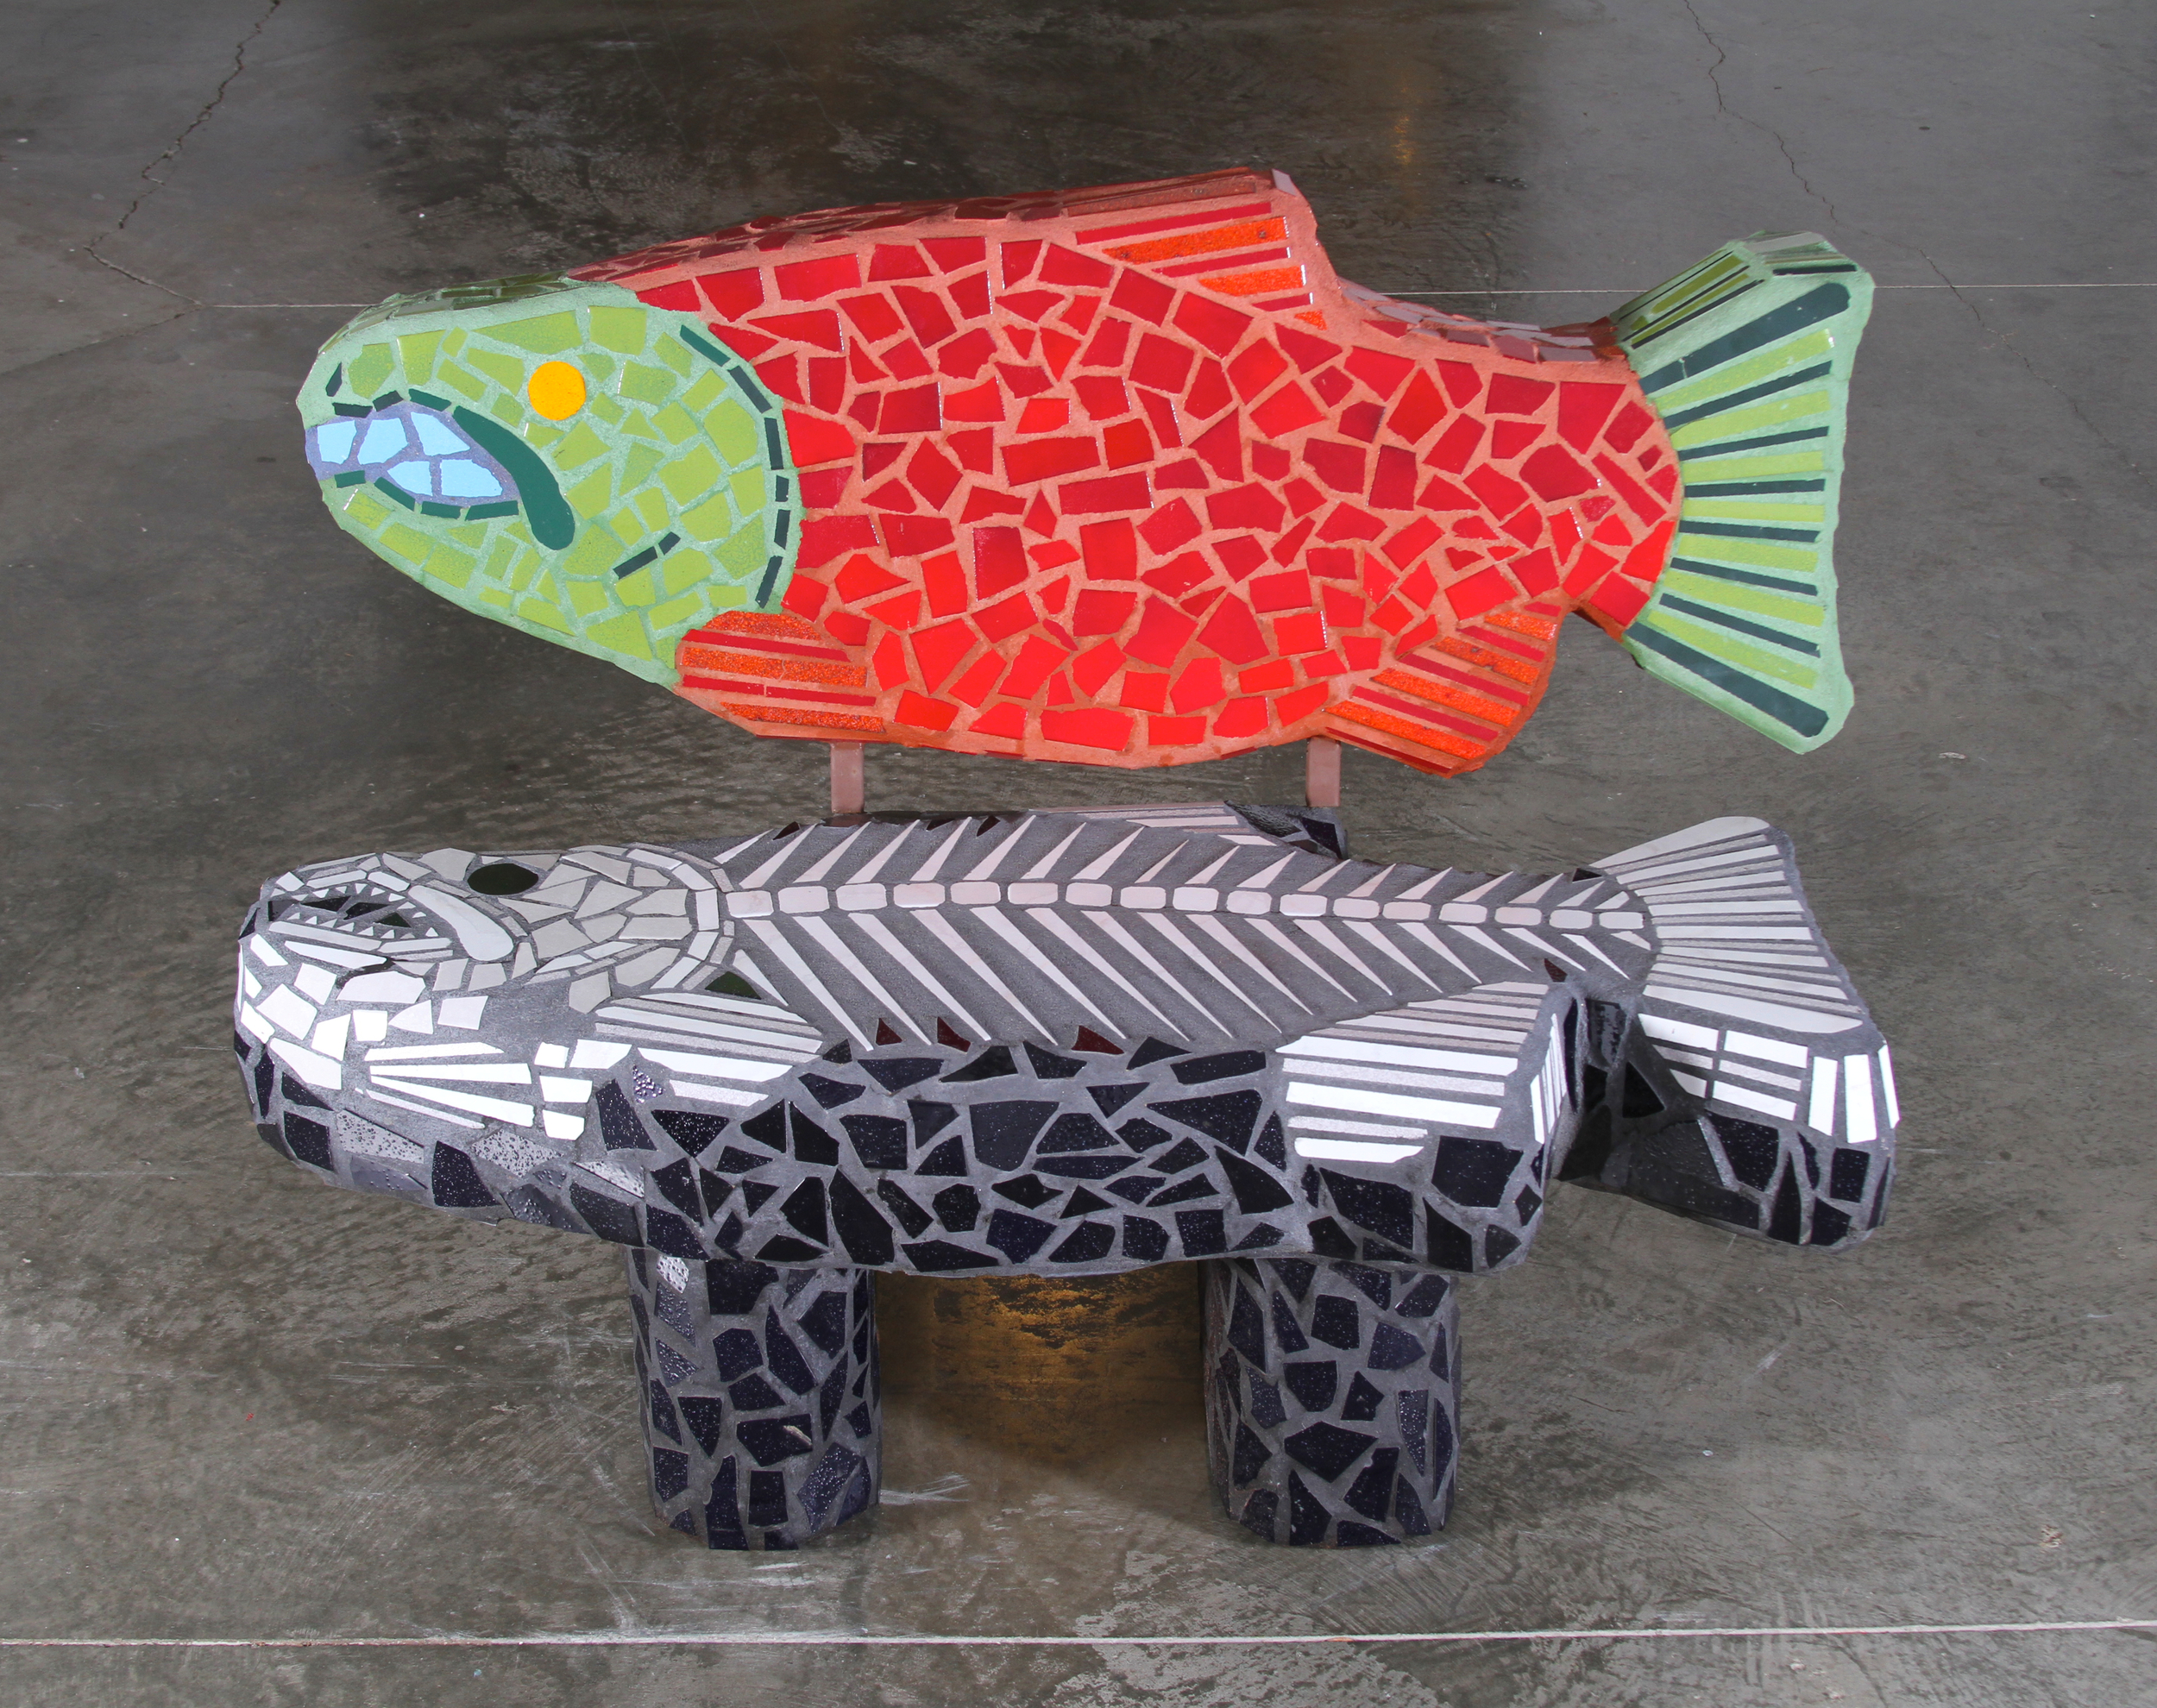  “Salmon’s Shadow” (Bench) 41”x51”x30” Mosaic tile and cement 2011 